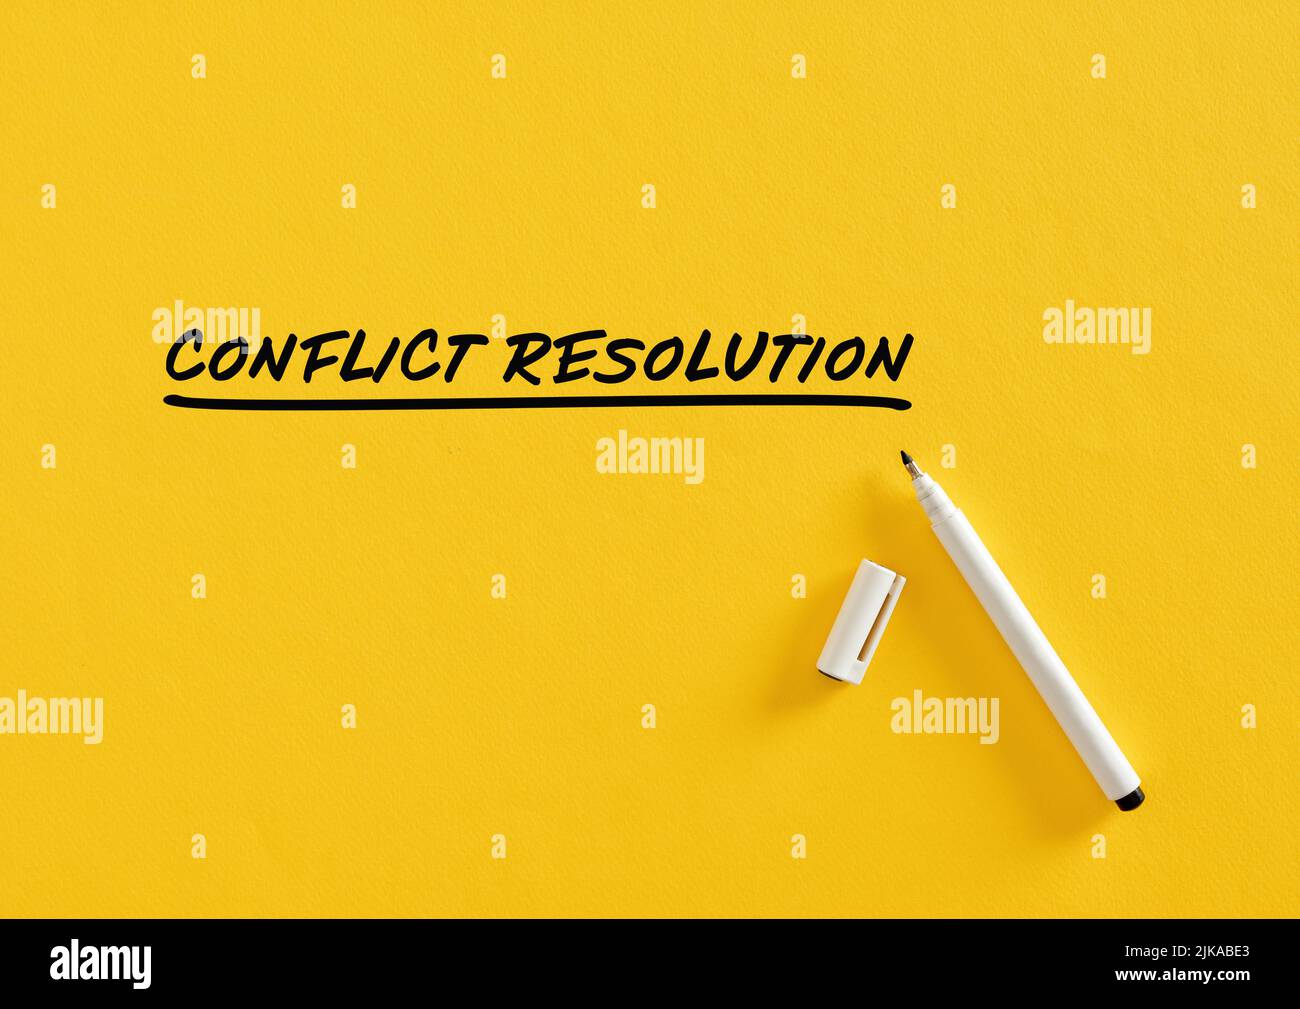 Conflict resolution message written on yellow background with felt tip pen. Business concept. Stock Photo